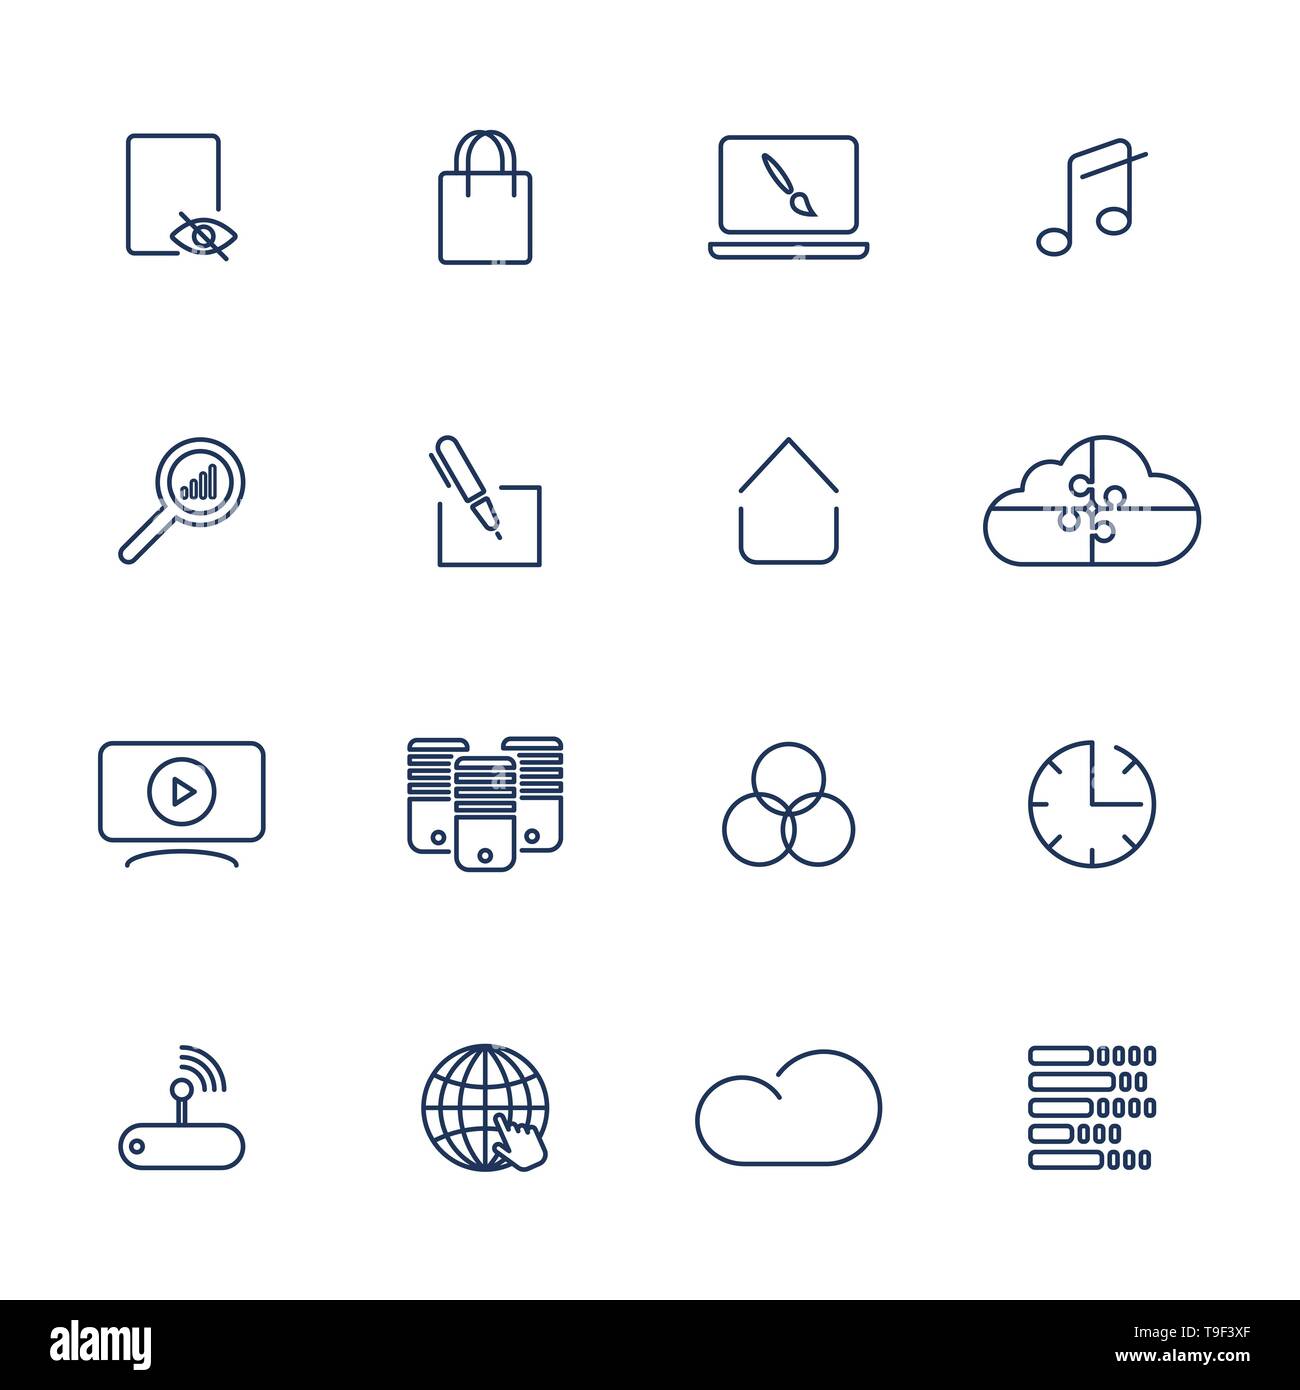 Set of 16 vector icons for software, application or websites - social media and technology Stock Vector